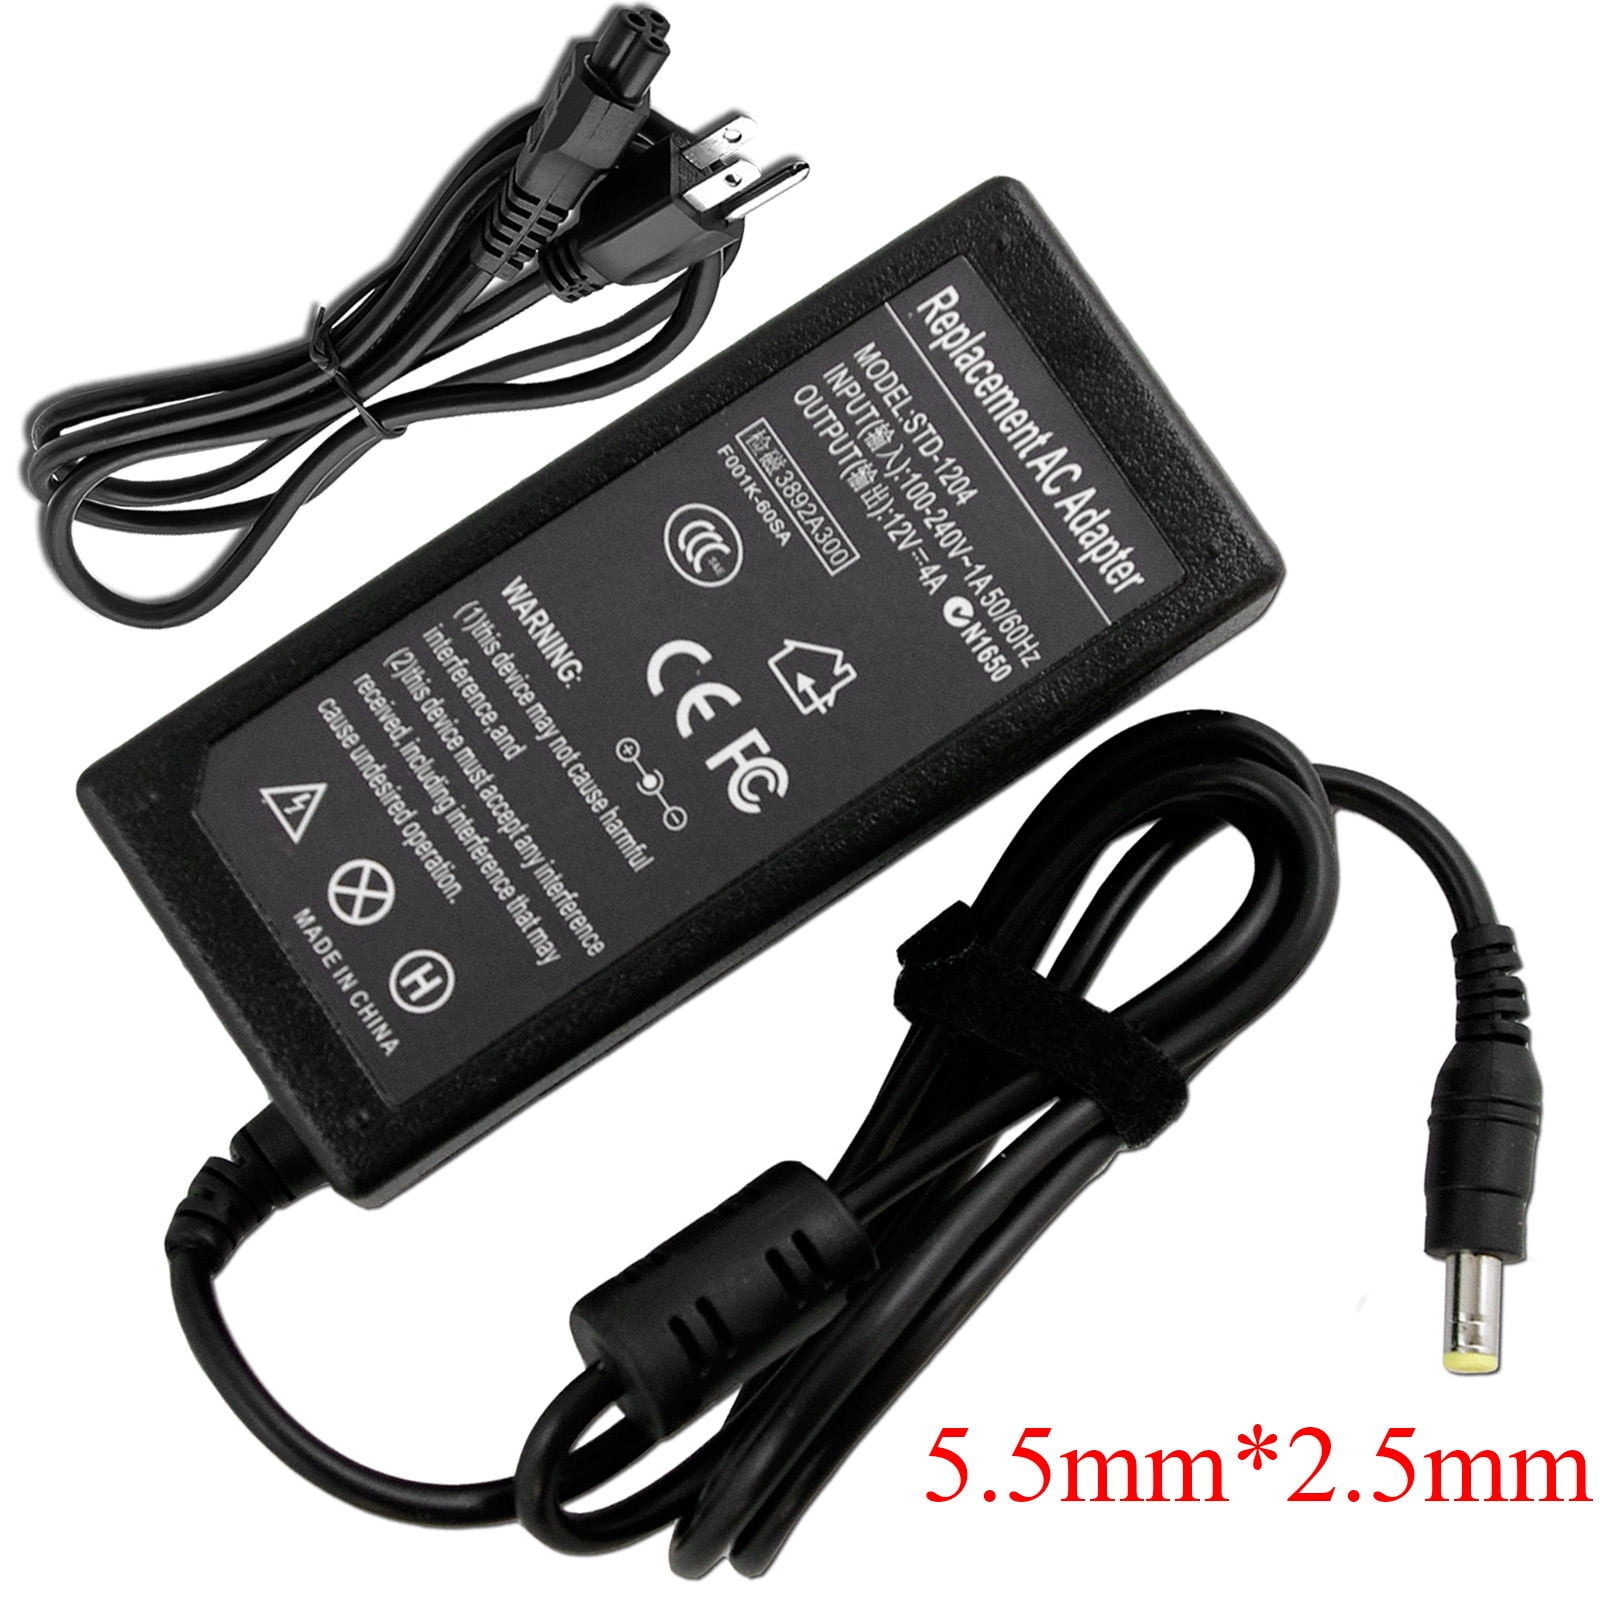 AC Adapter Charger Power Supply Cord For Dell S2340M S2340MC 23